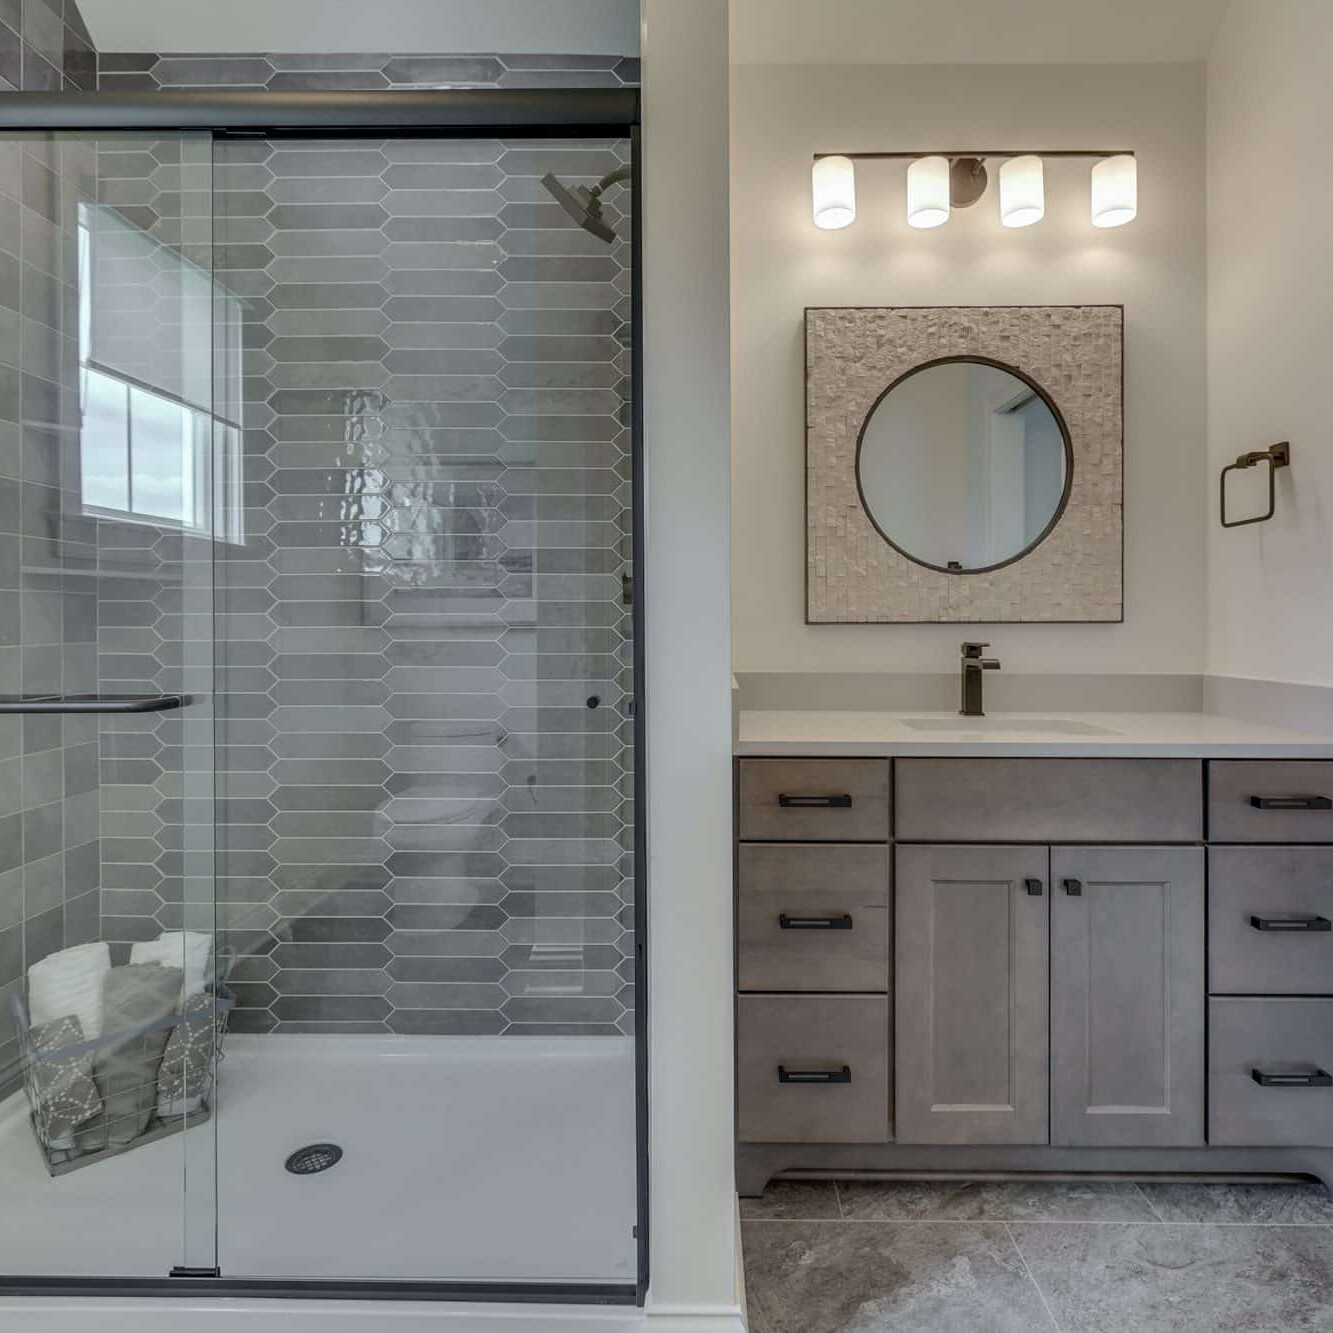 A gray bathroom with a glass shower stall.